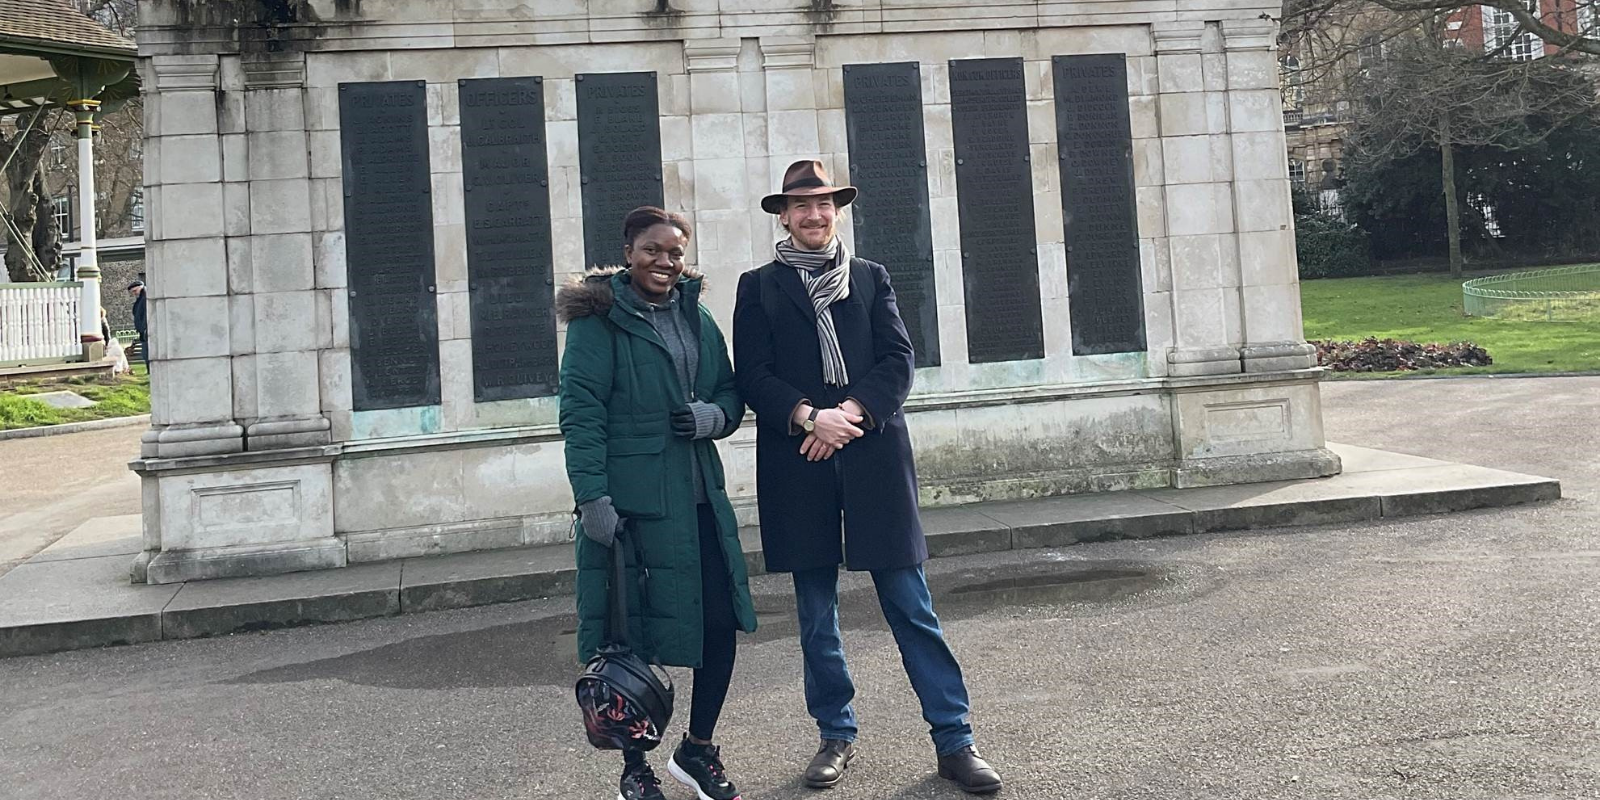 Oluwatoyin Bayagbon and Mark Laynesmith standing infront of a statue in Forbury Gardens.